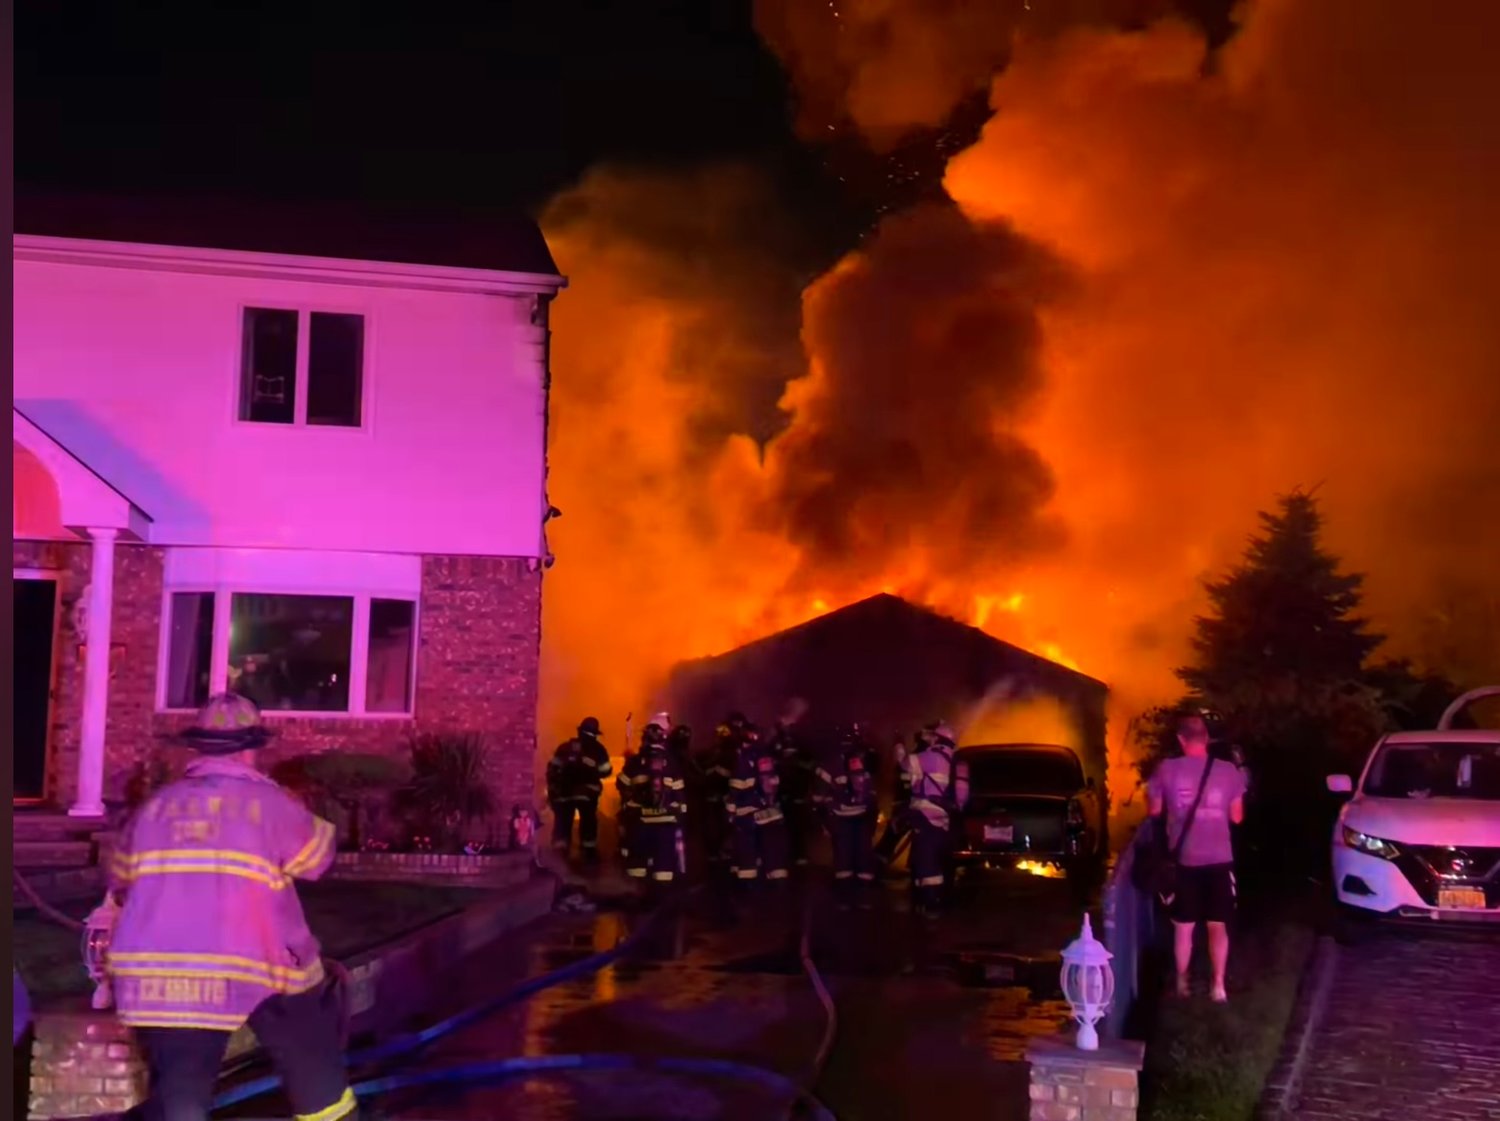 The Lakeview Fire Department was one of 10 fire departments to assist the Franklin Square Munson Fire Department in responding to a garage fire in the late hours of July 13.